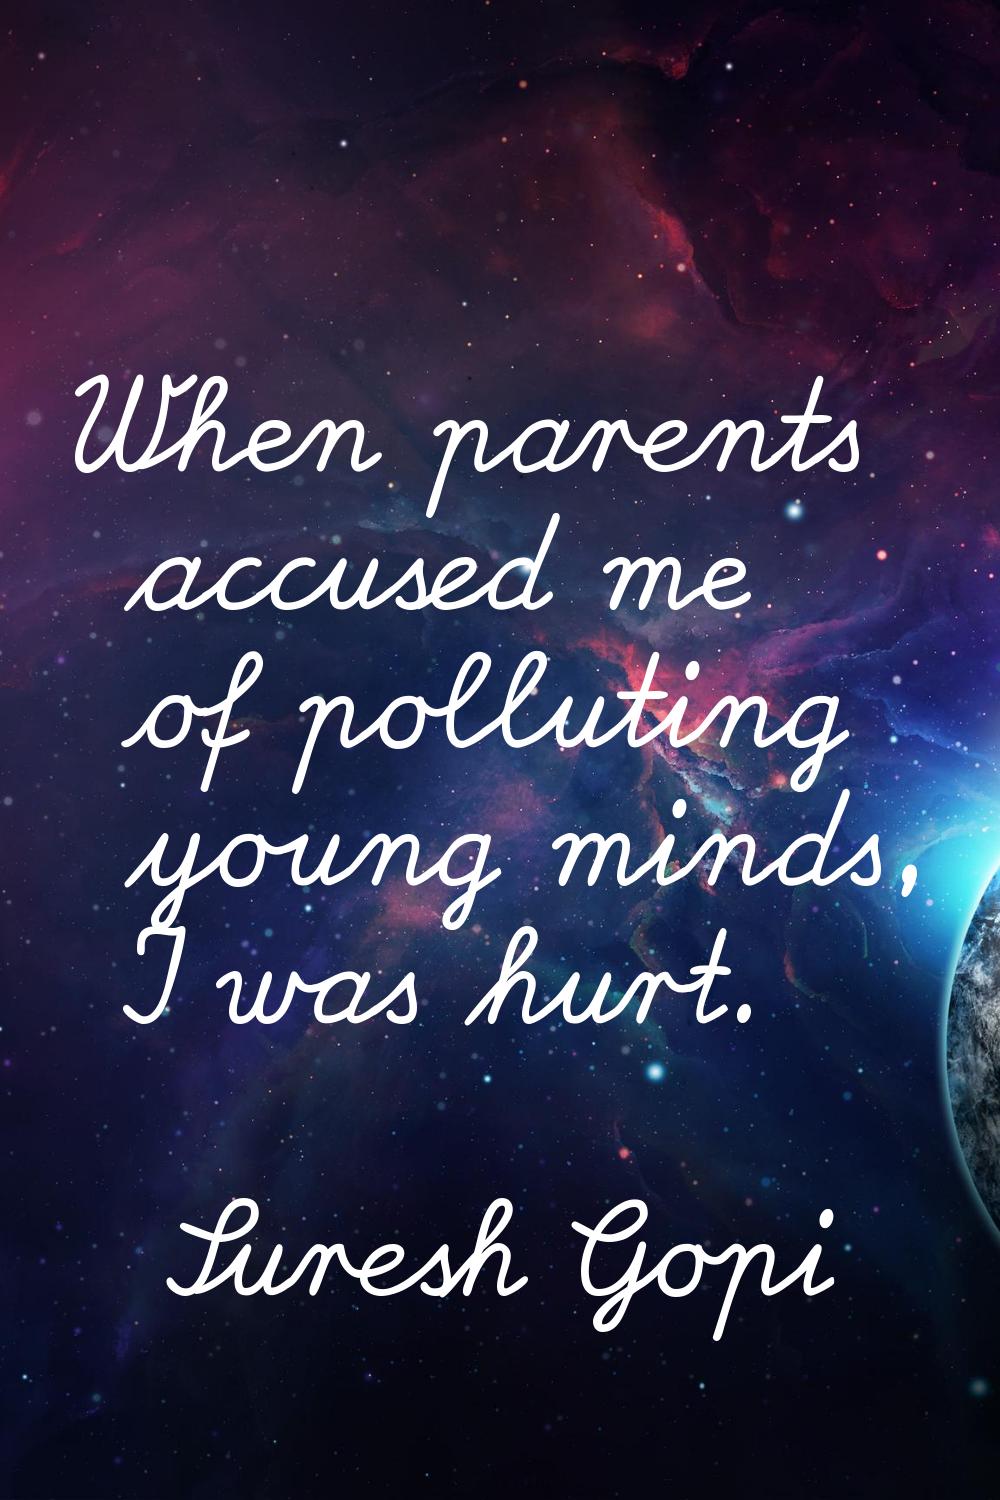 When parents accused me of polluting young minds, I was hurt.